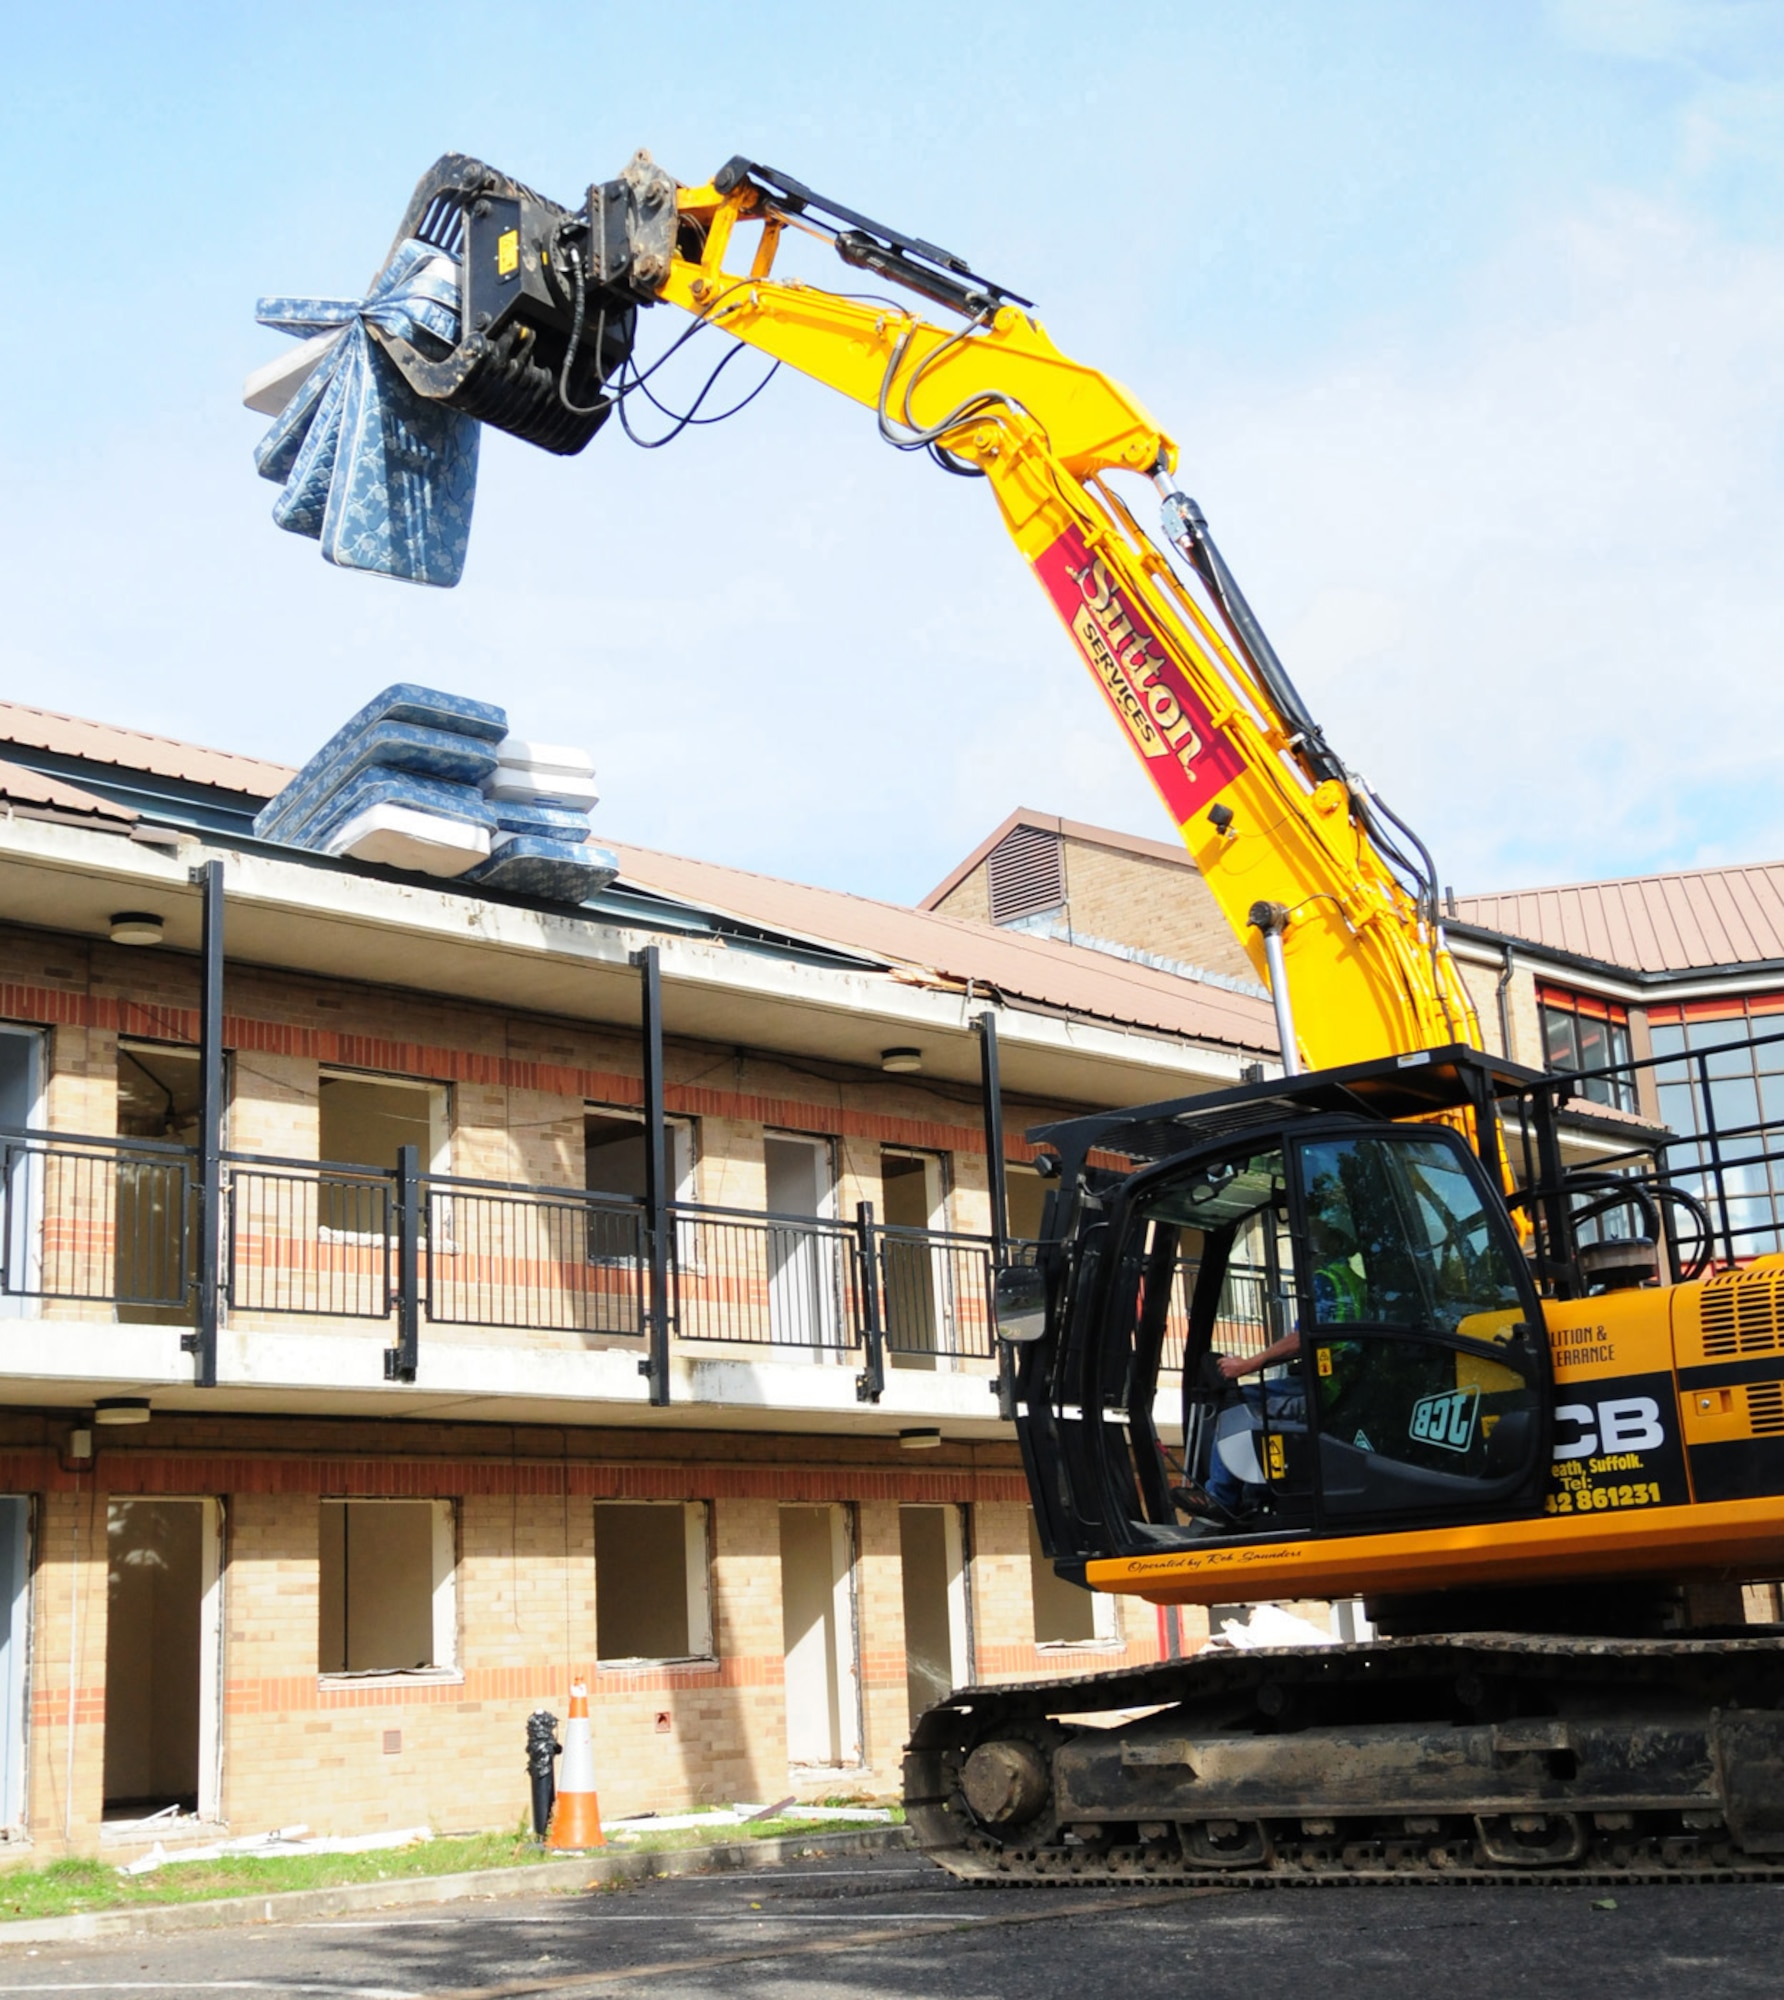 RAF MILDENHALL, England -- A dinosaur-like JCB picks up old mattresses ready to drop them in the dumpster in preparation of demolition of old dormitories here. Contractors are clearing Dorm 212 before it's knocked down. The quality of the Airmen's quarters had deteriorated and had become surplus to requirements. Once demolition is complete, which is scheduled for January 2011, the area will be landscaped. (U.S. Air Force photo/Karen Abeyasekere)